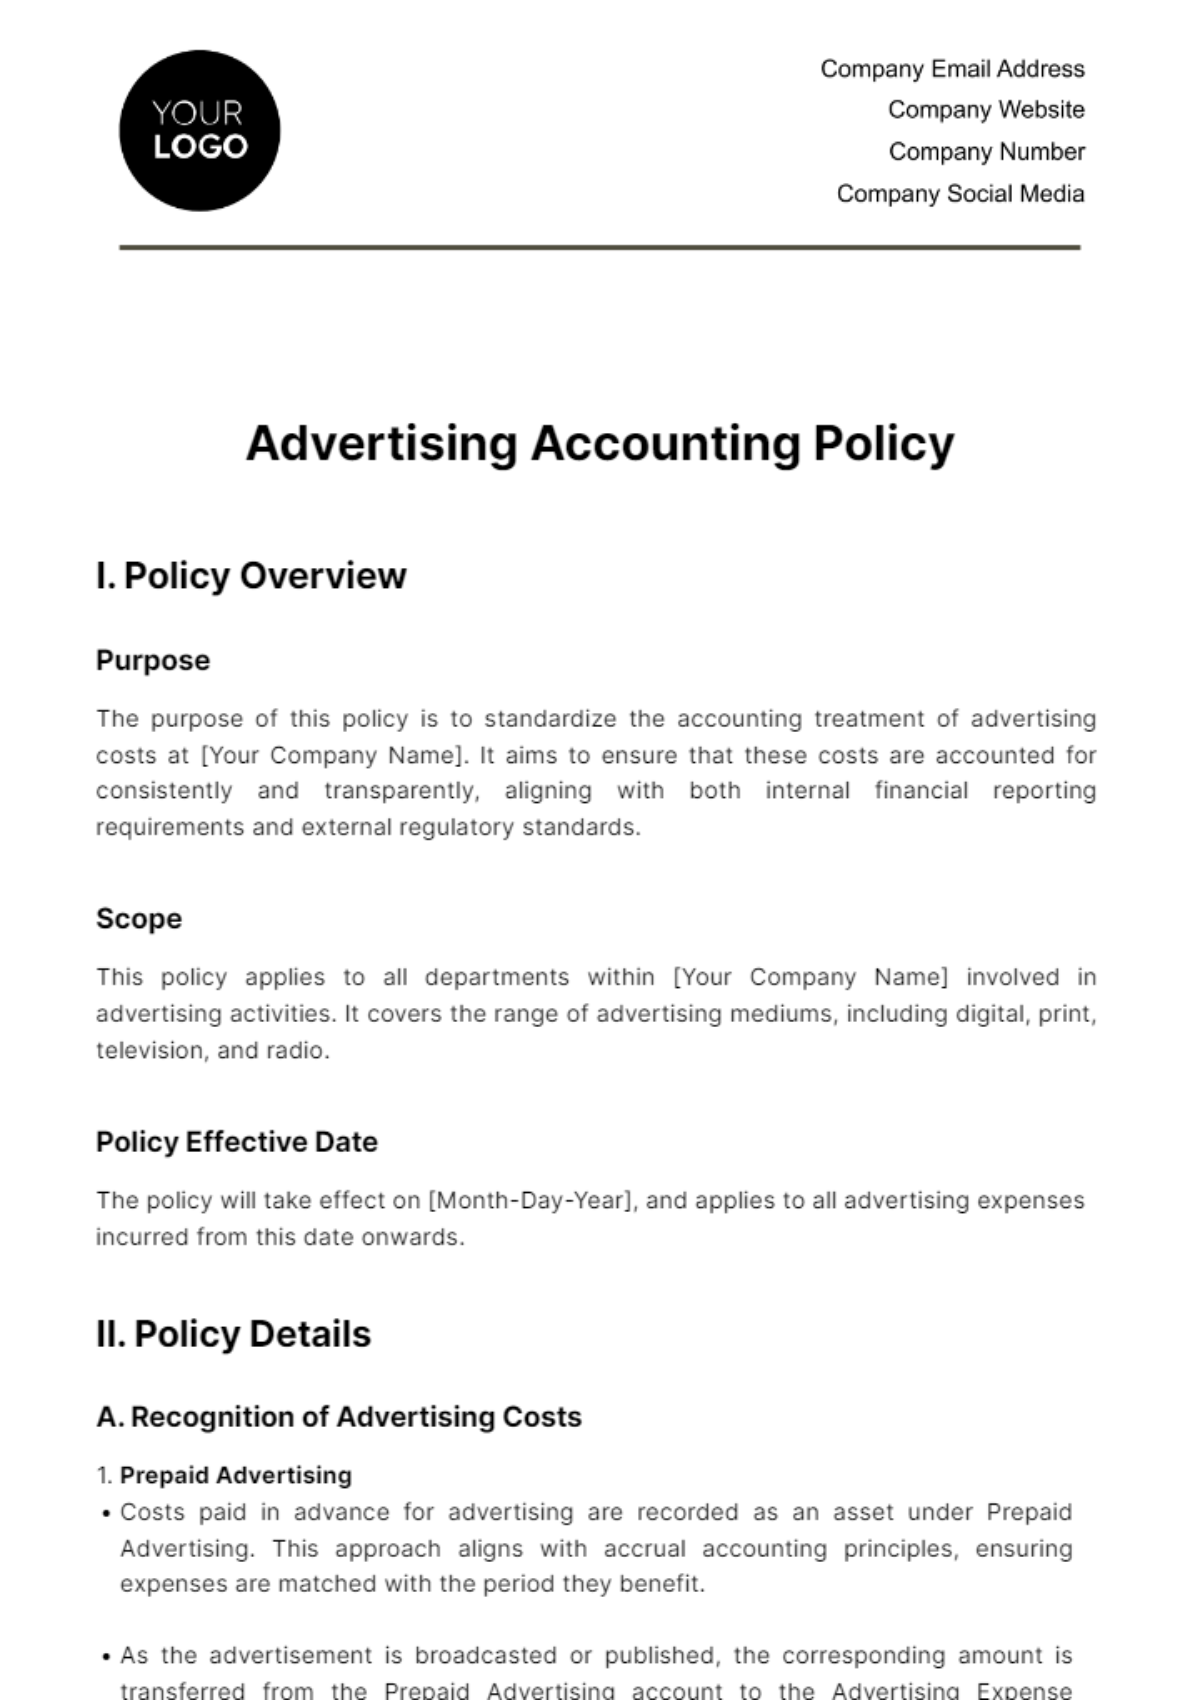 Free Advertising Accounting Policy Template